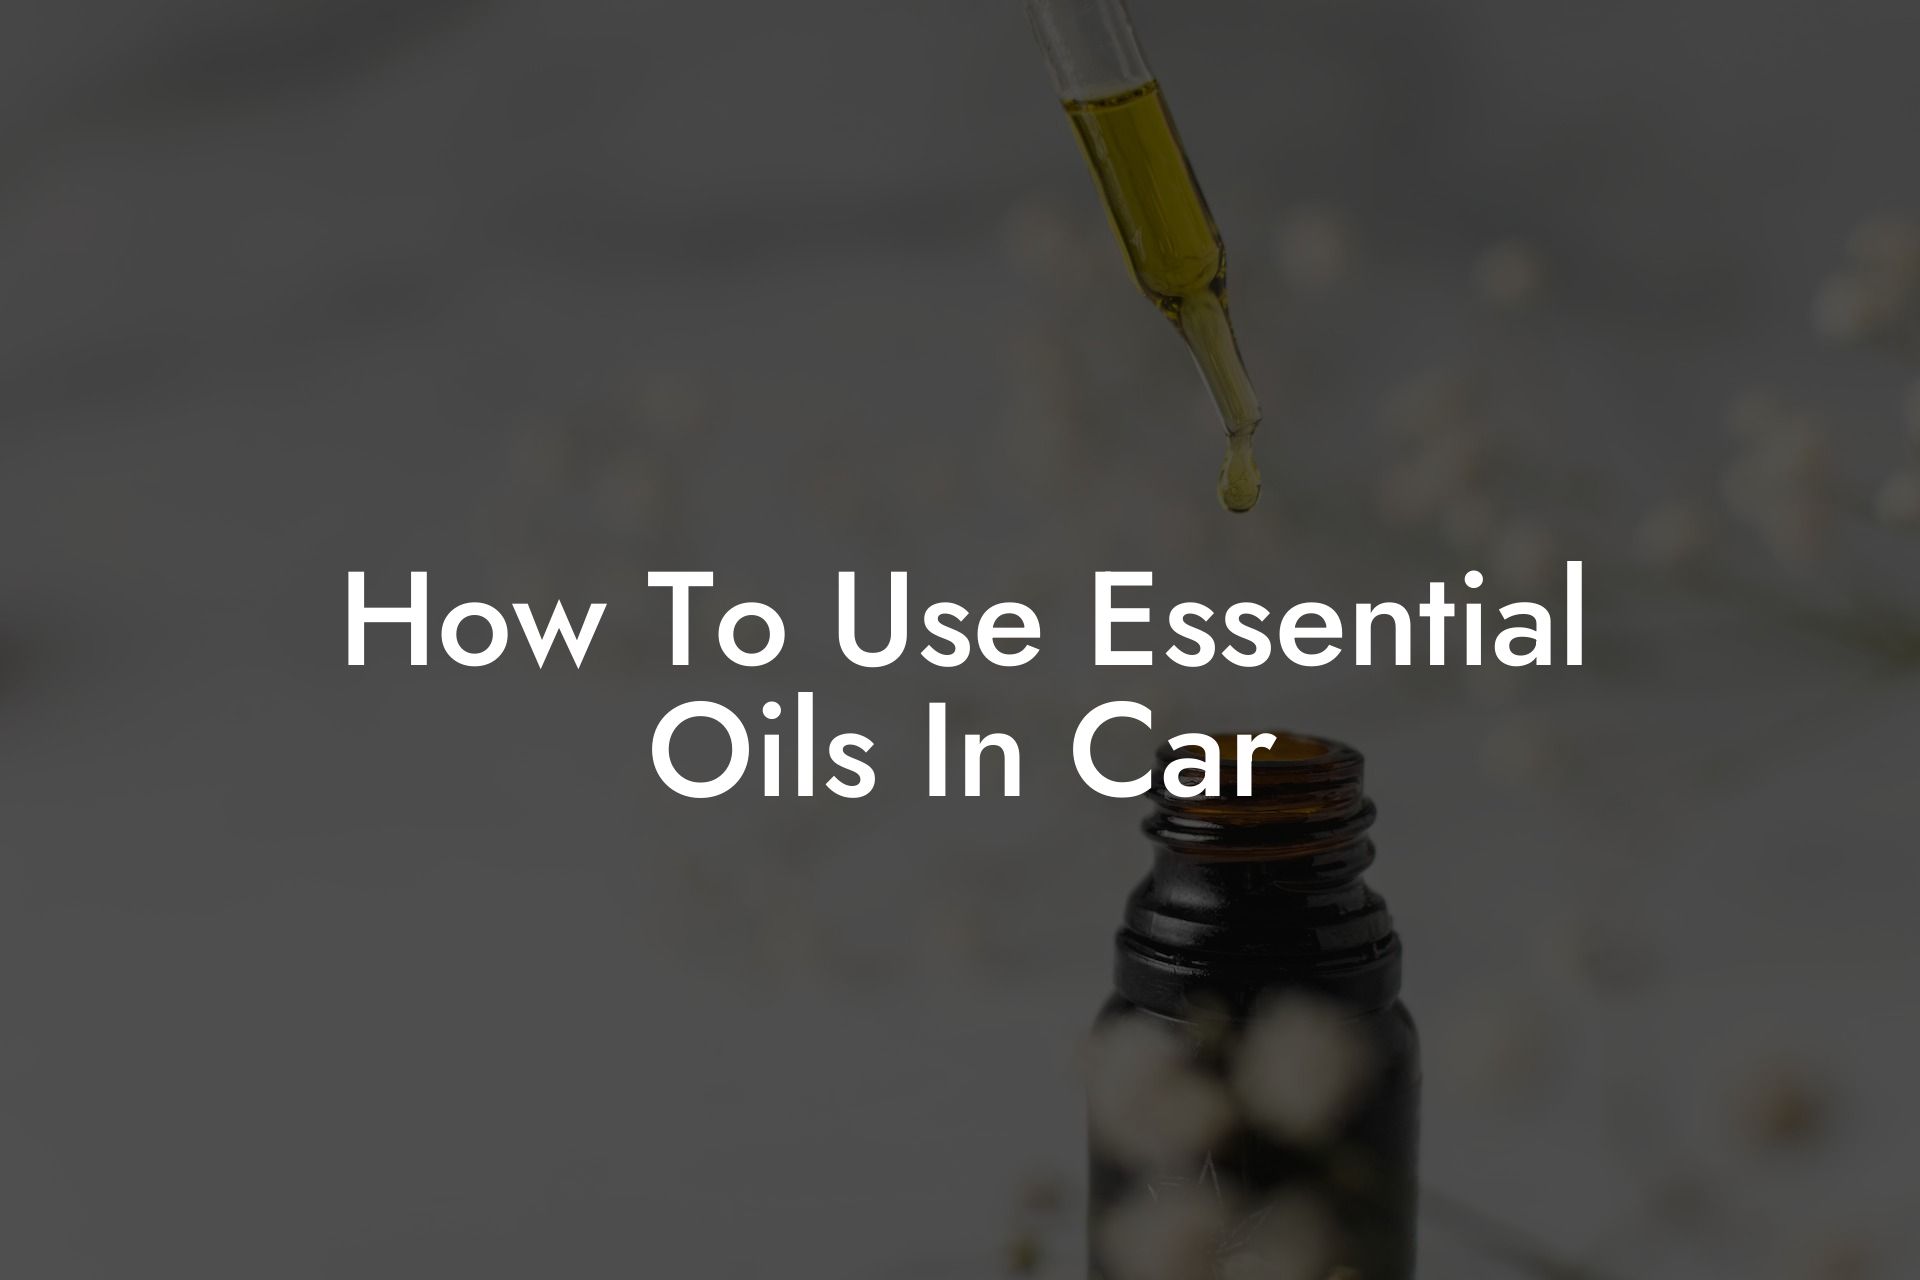 How To Use Essential Oils In Car